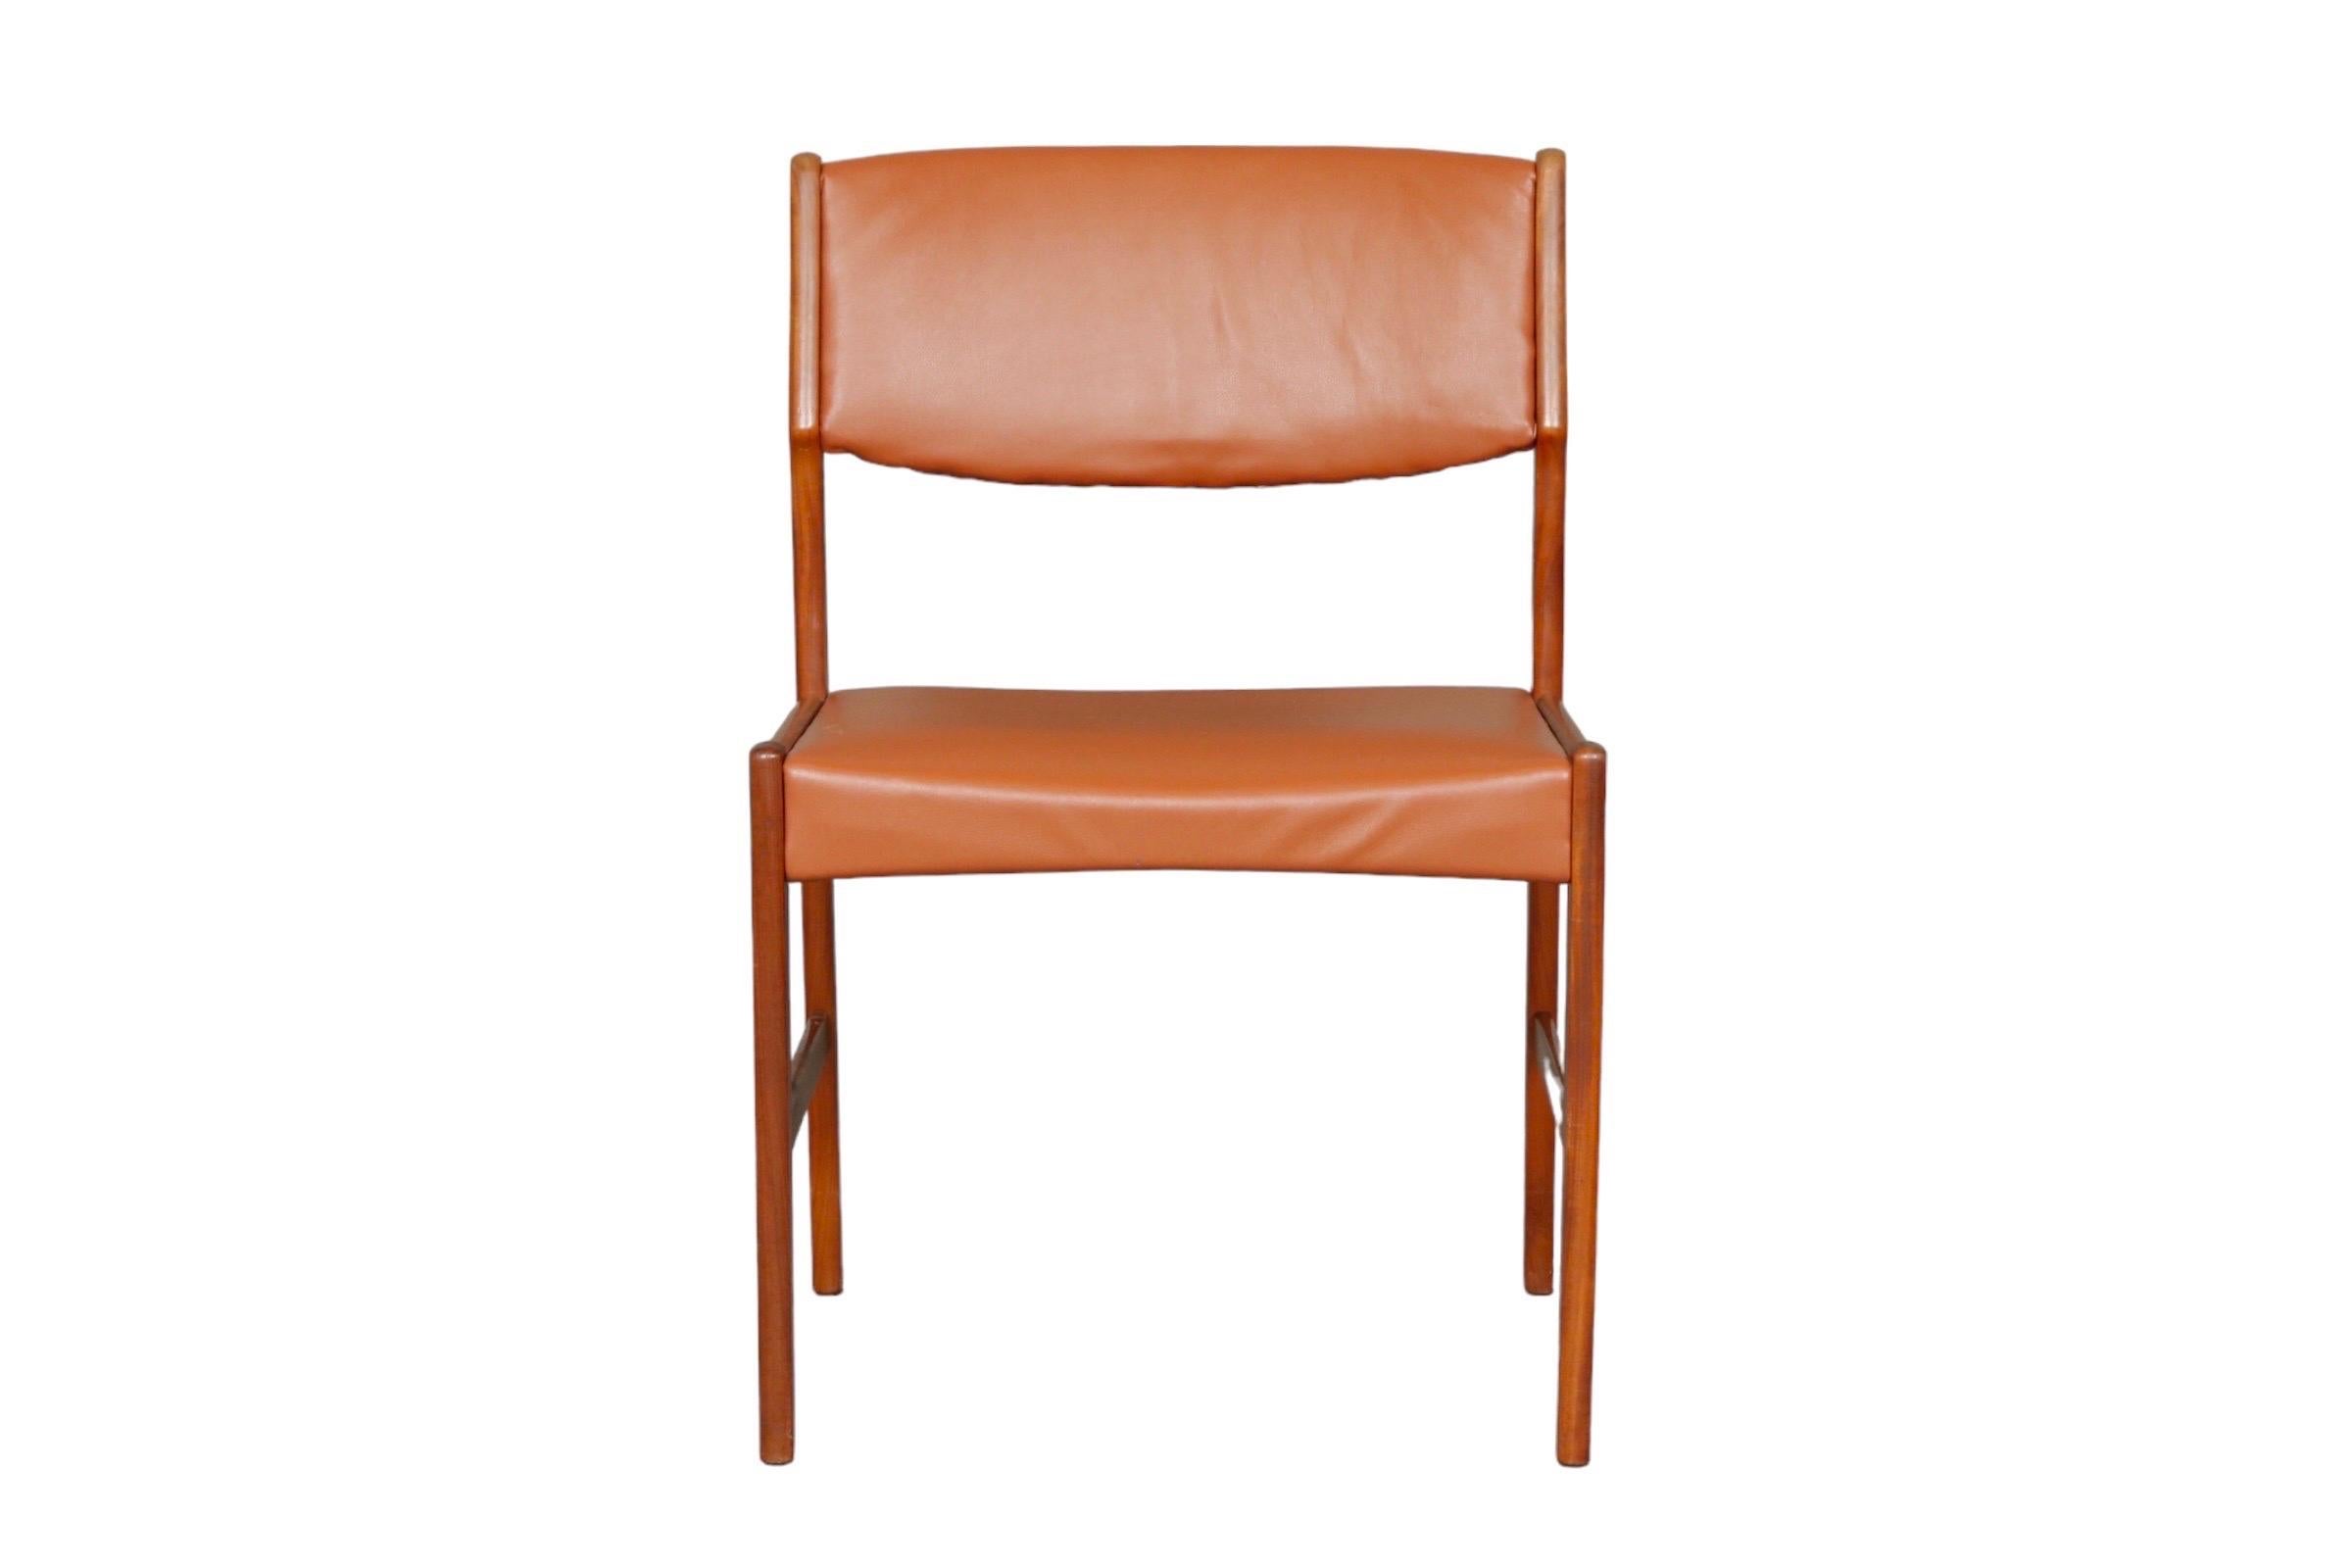 Faux Leather Set of 6 Danish Mid-Century Modern Dining Chairs in Teak